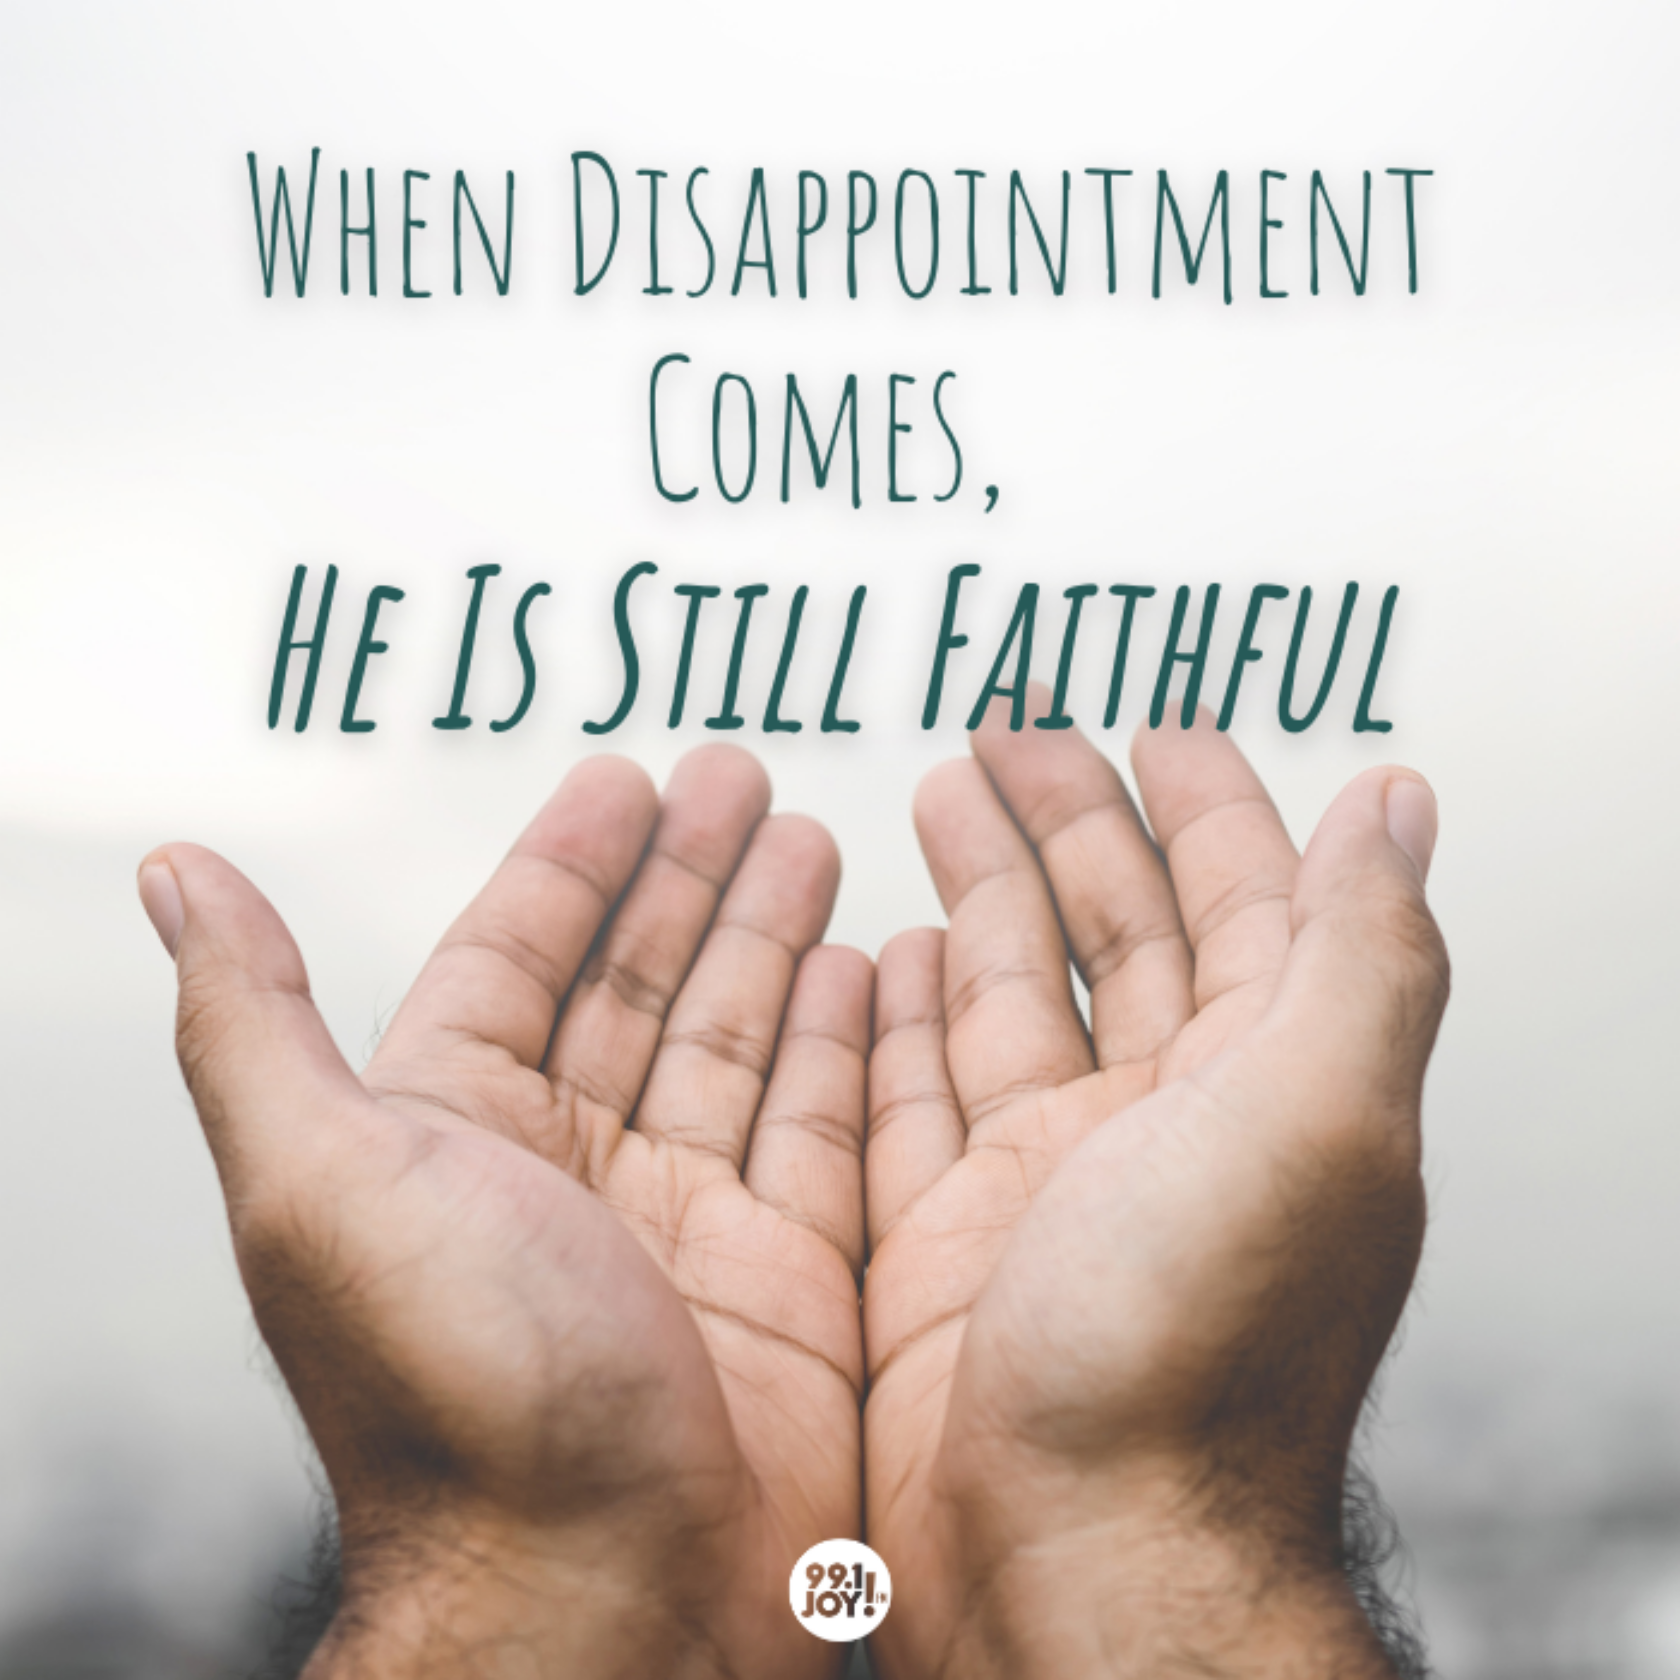 When Disappointment Comes, He Is Still Faithful